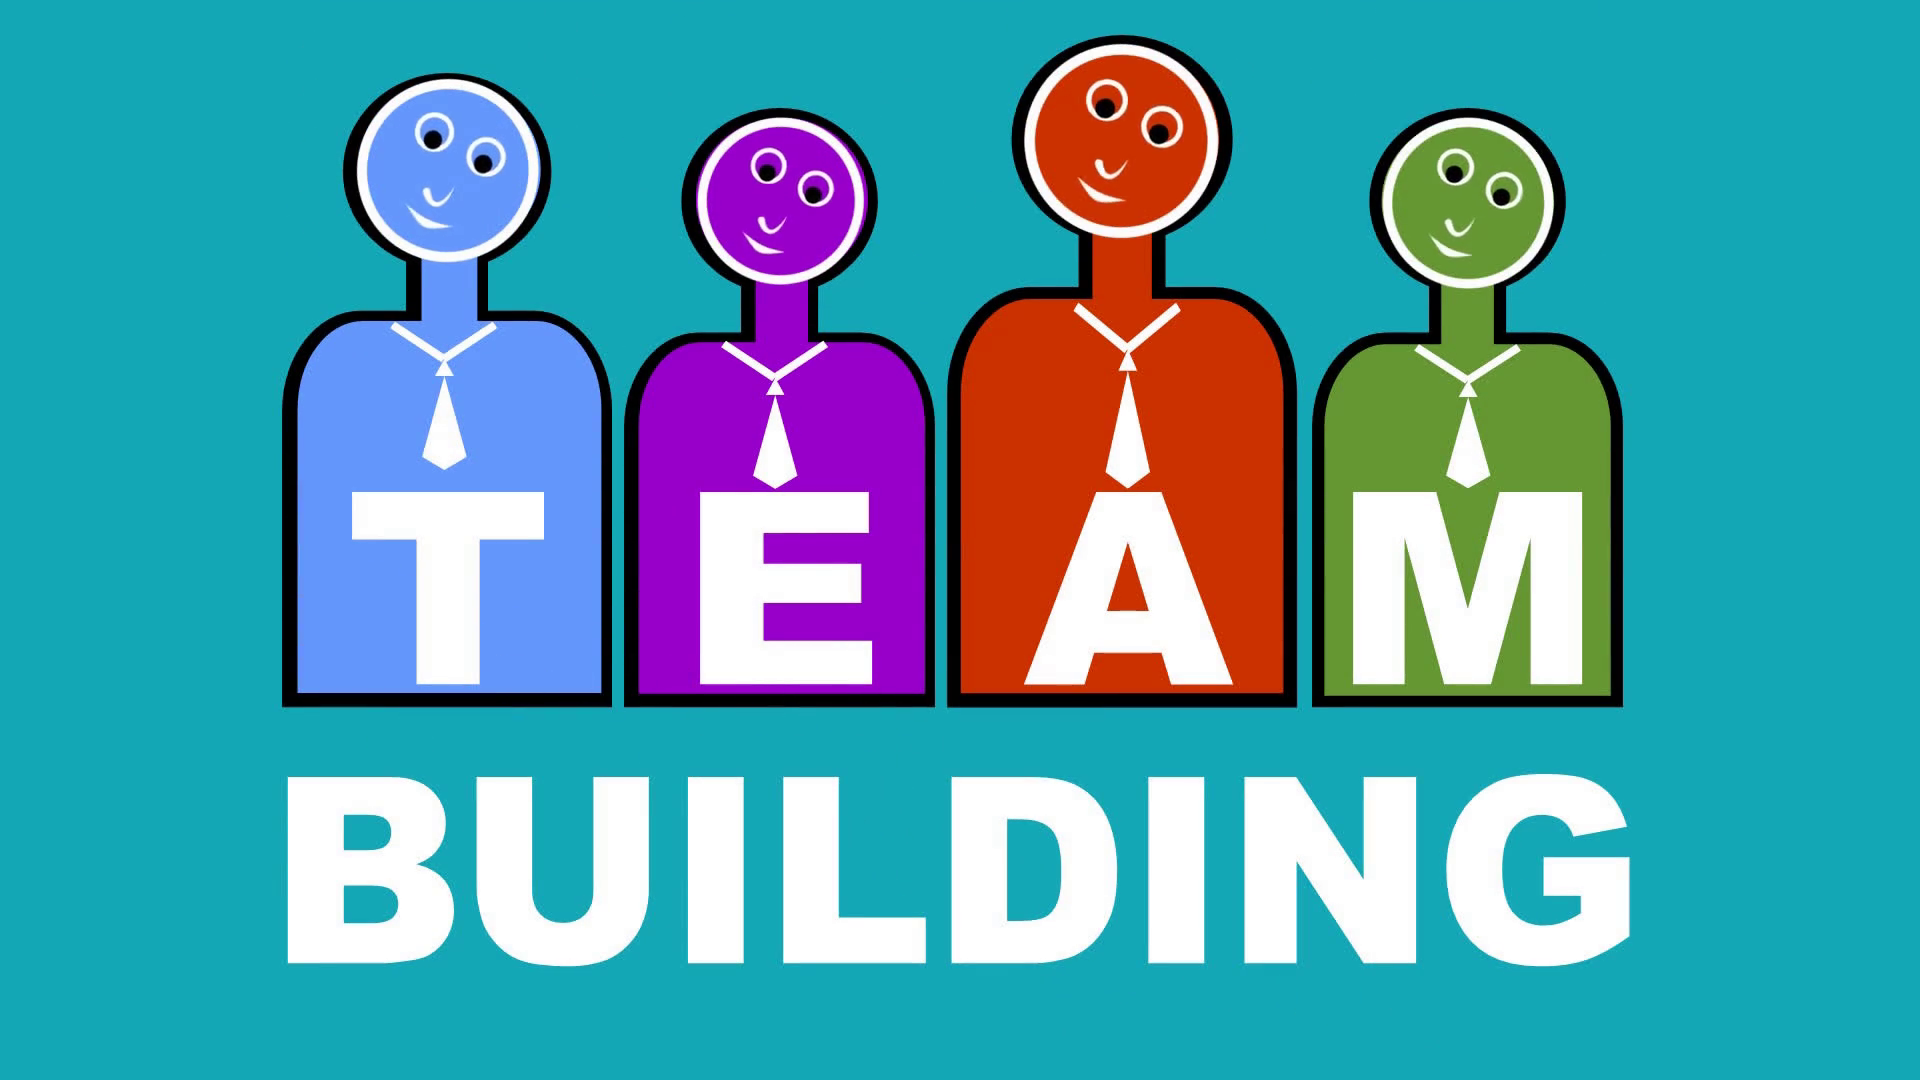 Team Building PNG HD-PlusPNG.